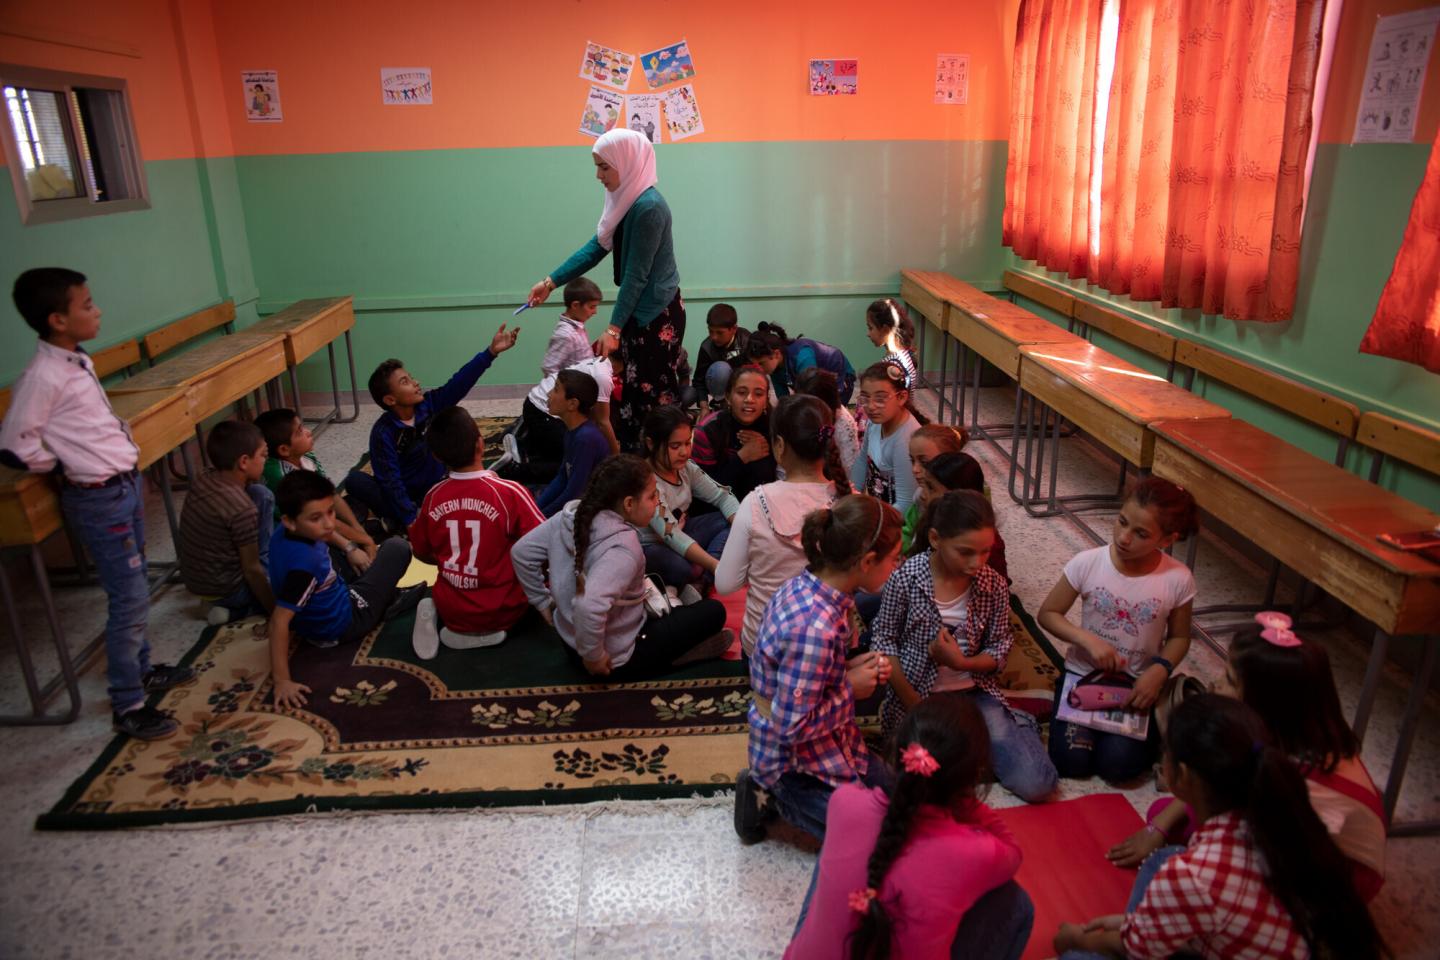 A Syrian teacher hands something to a child sitting among a group of children on a rug.